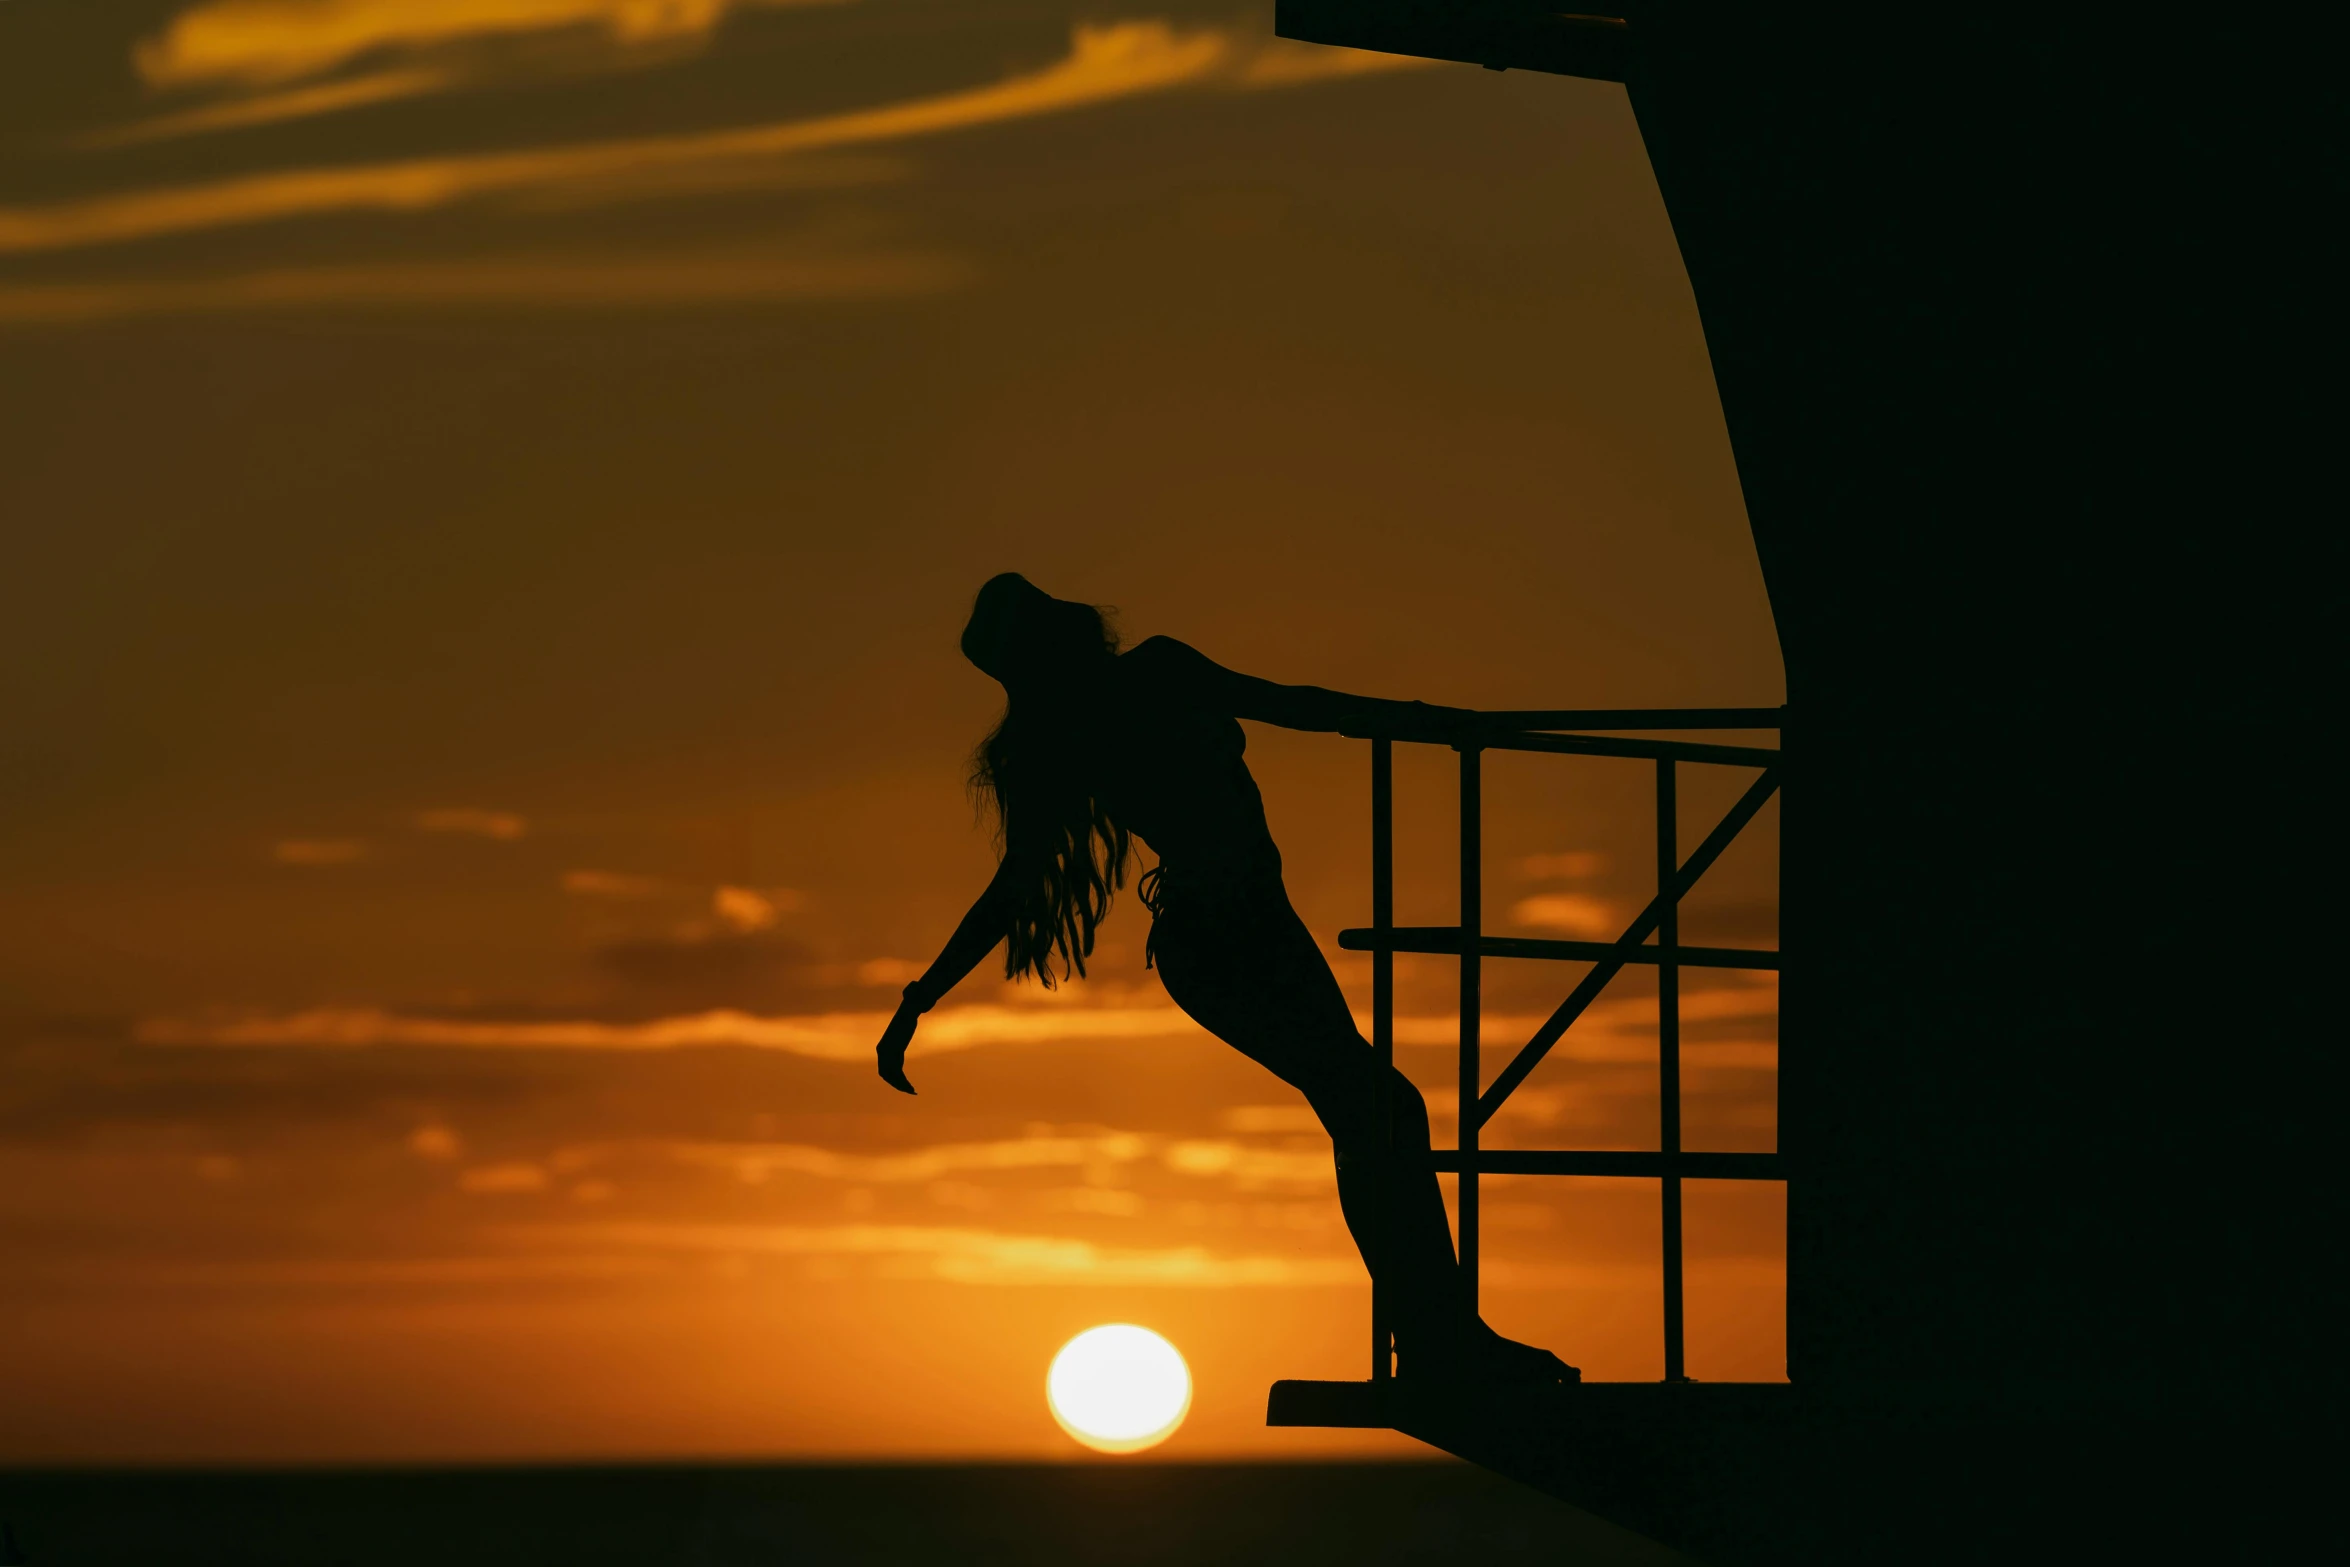 the woman is silhouetted against the setting sun on a ladder